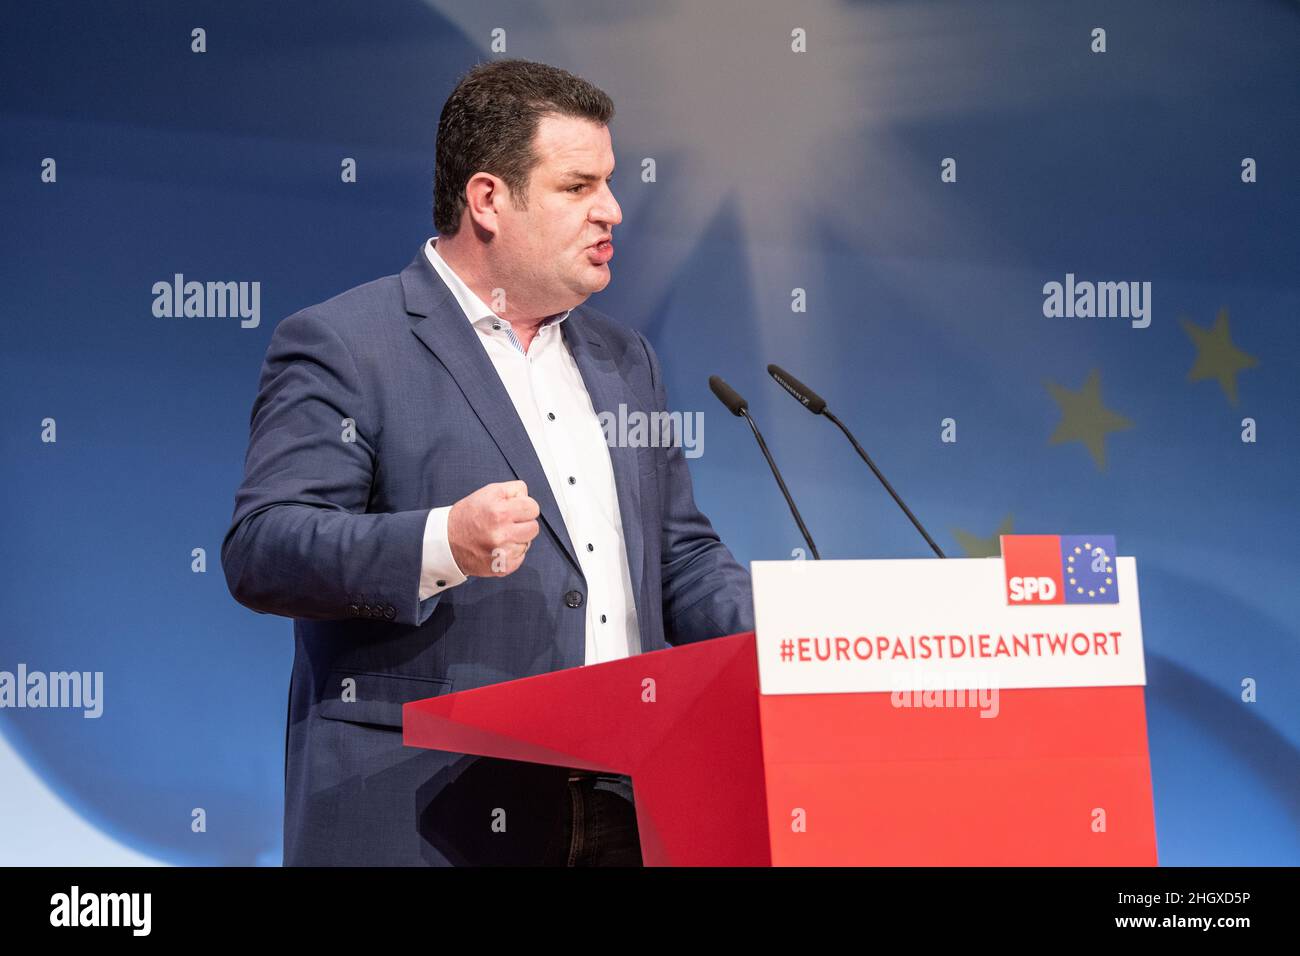 Hubertus Heil speaking at the 2019 SPD party convention in Berlin (23rd March 2019) Stock Photo